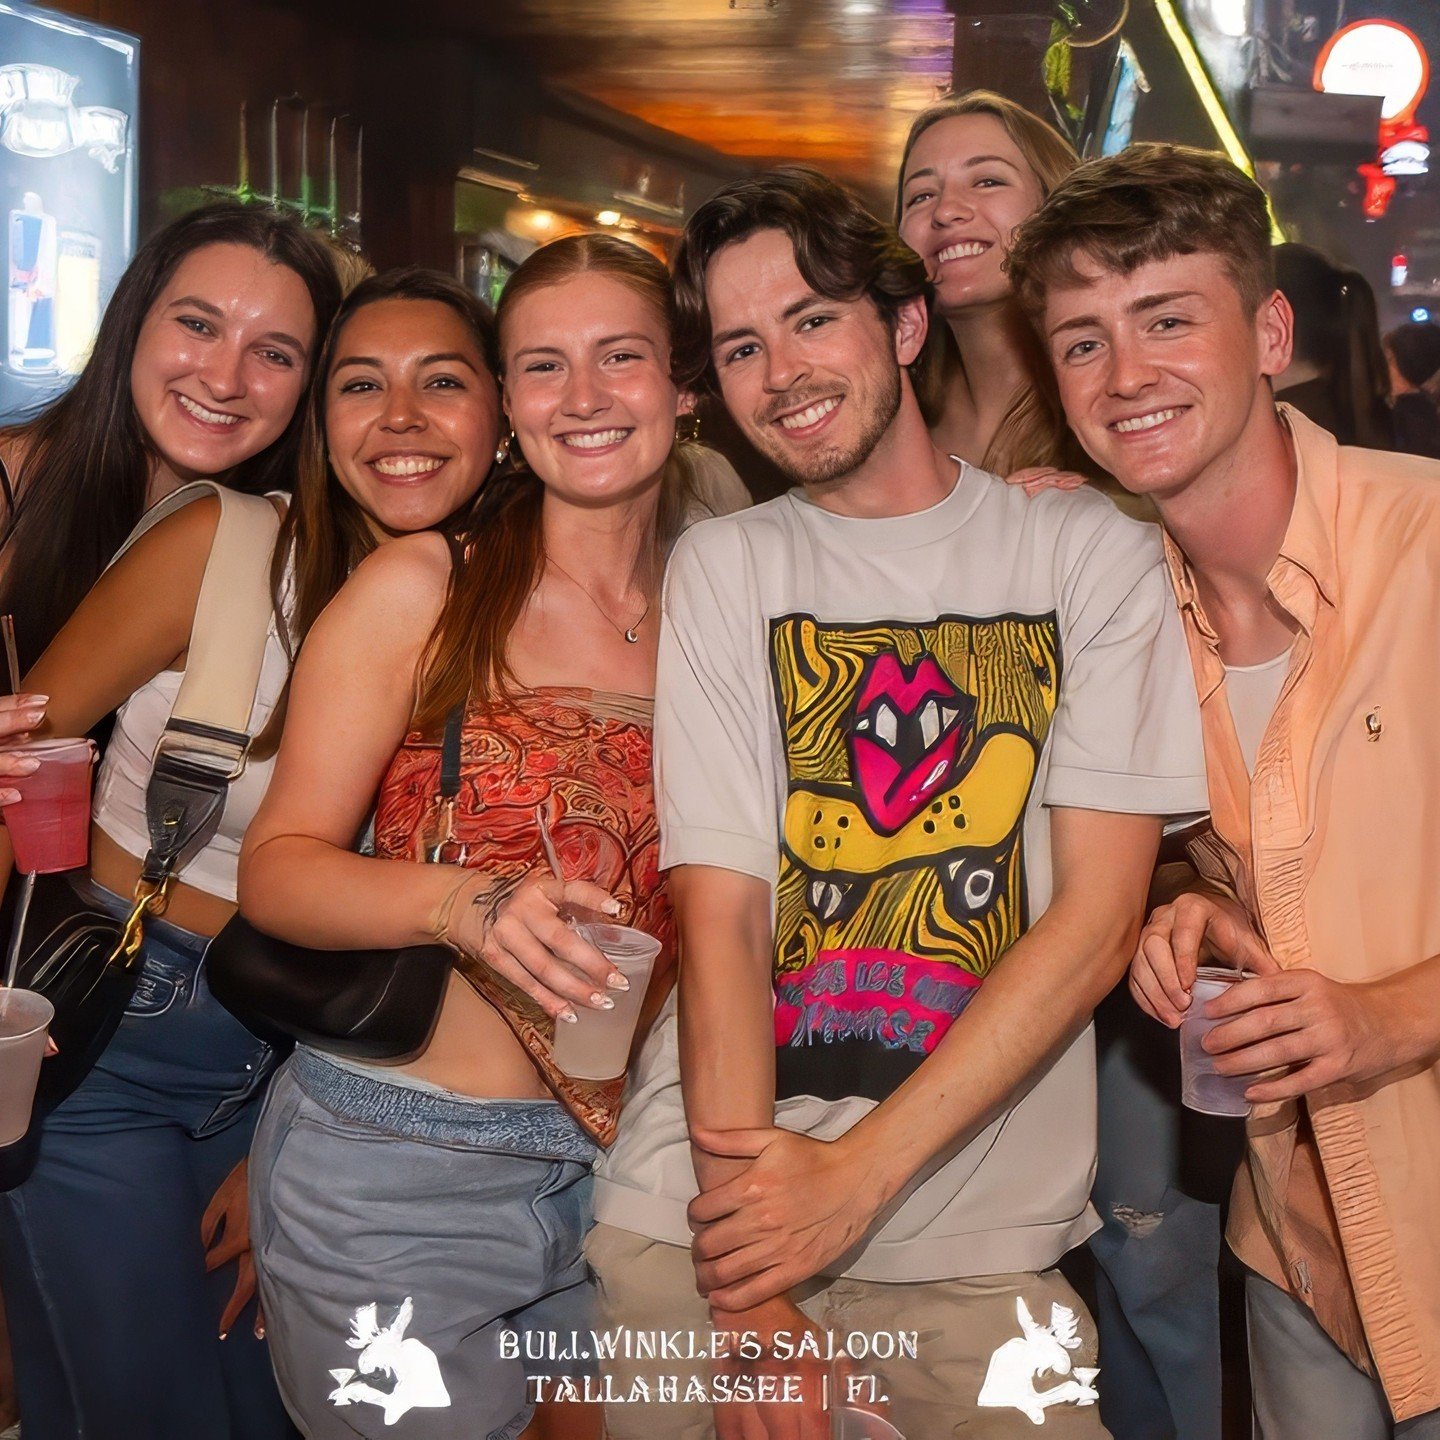 Still going all summer long! CollegeNight Thirsty Thursday Coming Up! Tonight &amp; every Wed Bulls opens @ 8pm w/ No Cover, Opt $10 AYCD for ladies, &amp; $$ off all whiskey we carry for everyone! Moose members always drink free!⁠
⁠
Follow us for th